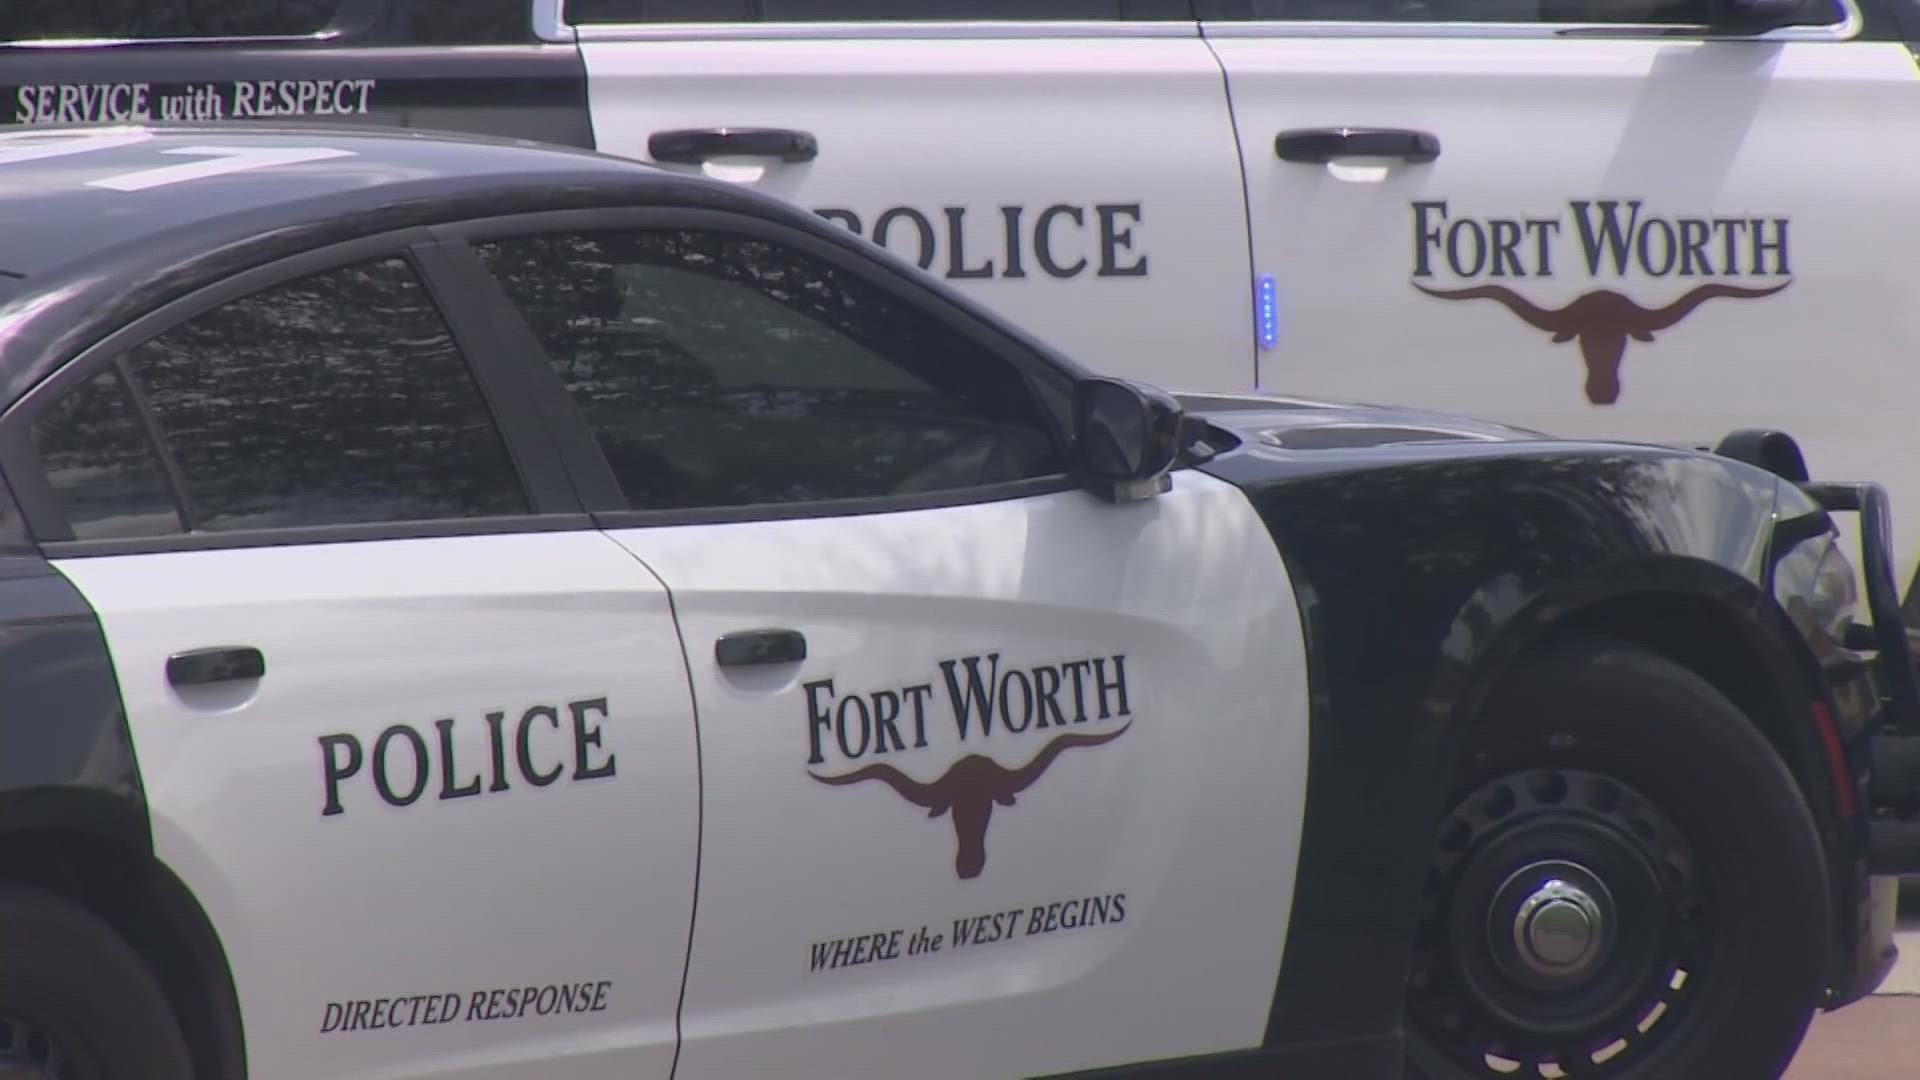 Police from Los Angeles, Inglewood and Fort Worth arrested the 76-year-old in connection to killings in 1980 and 1995.